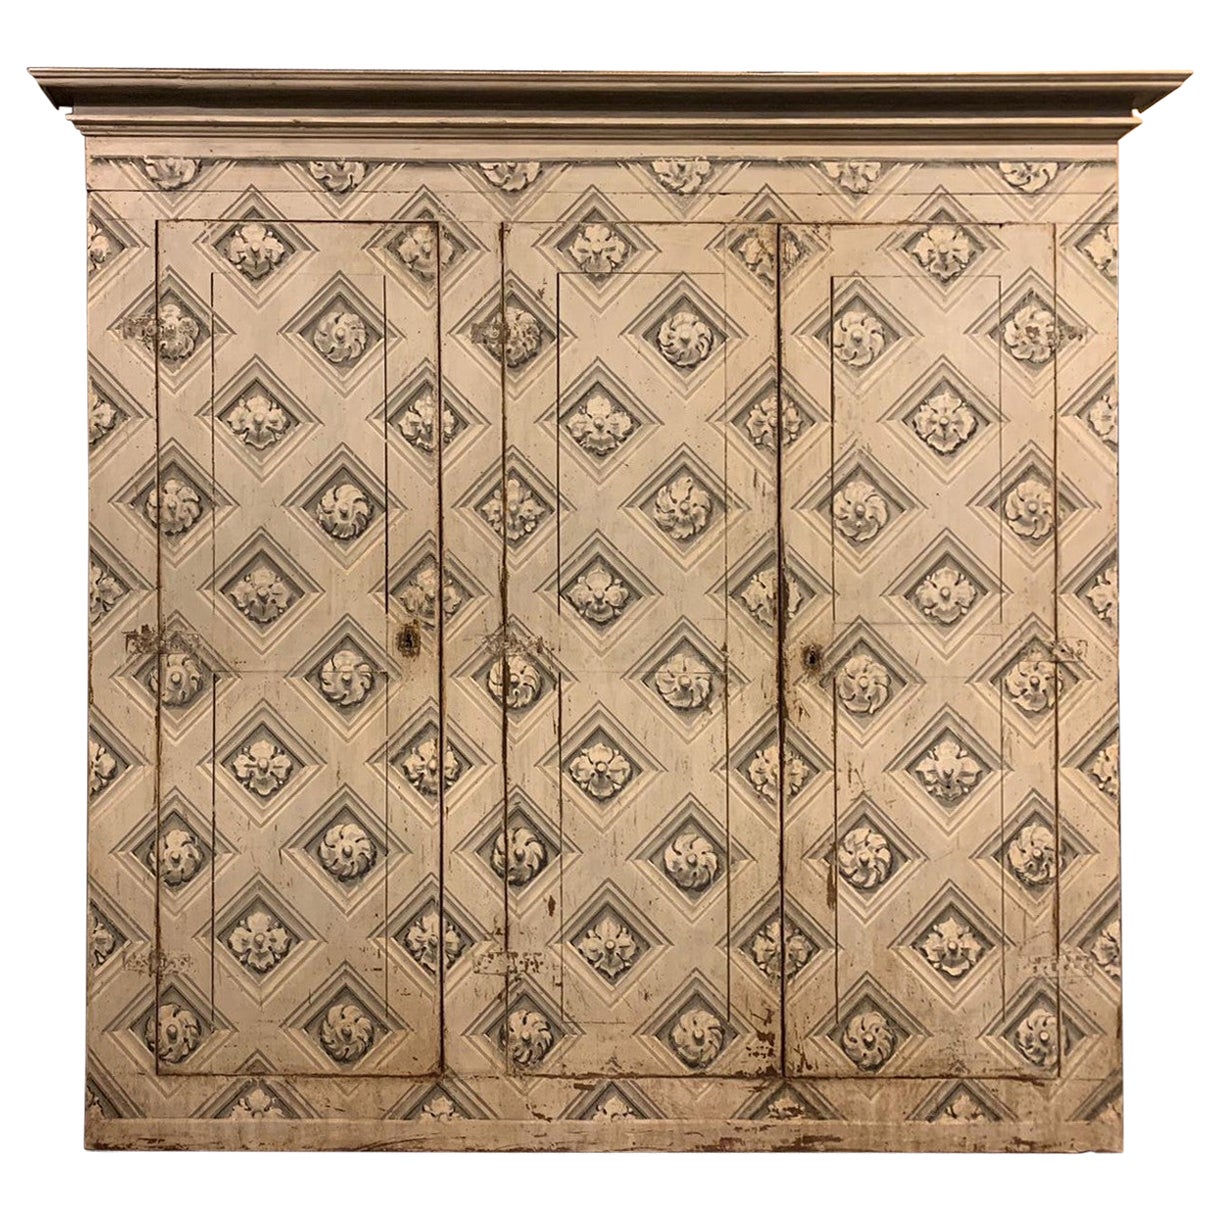 Antique Walnut Wall Cabinet Painted Classic Black and White Motifs, '700 Italy